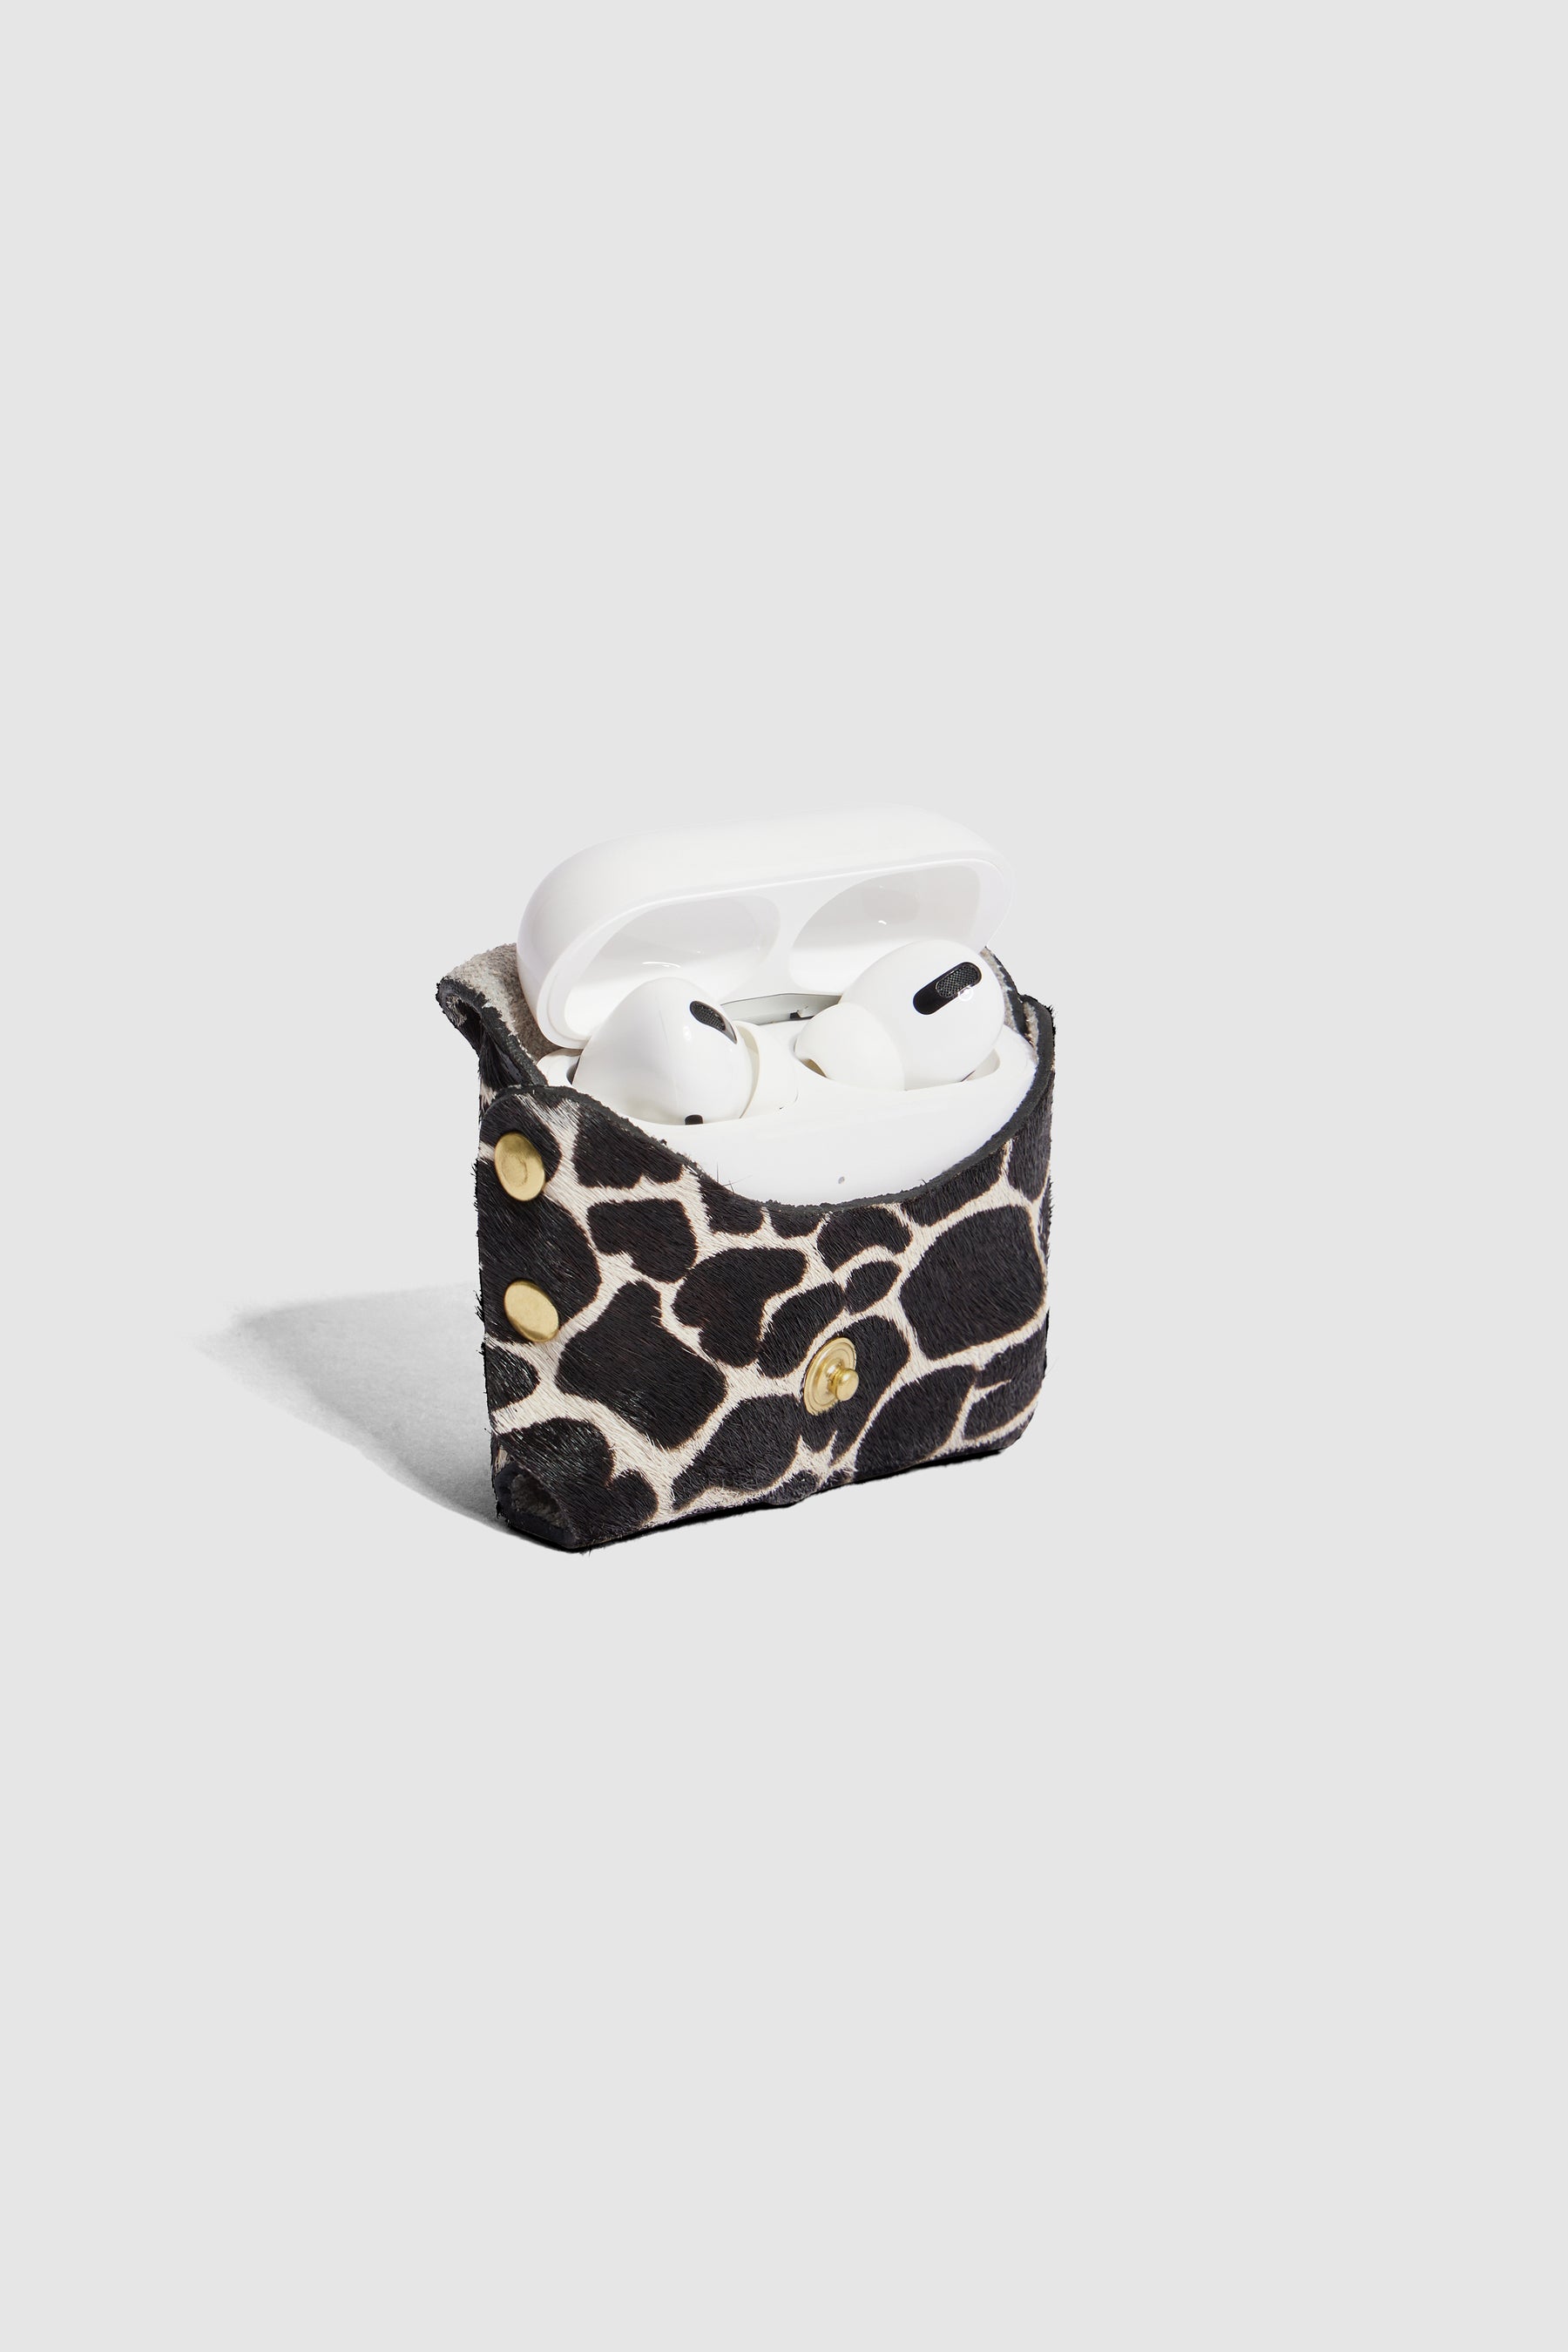 The Minis - Pro Airpods case in white Giraffe leather